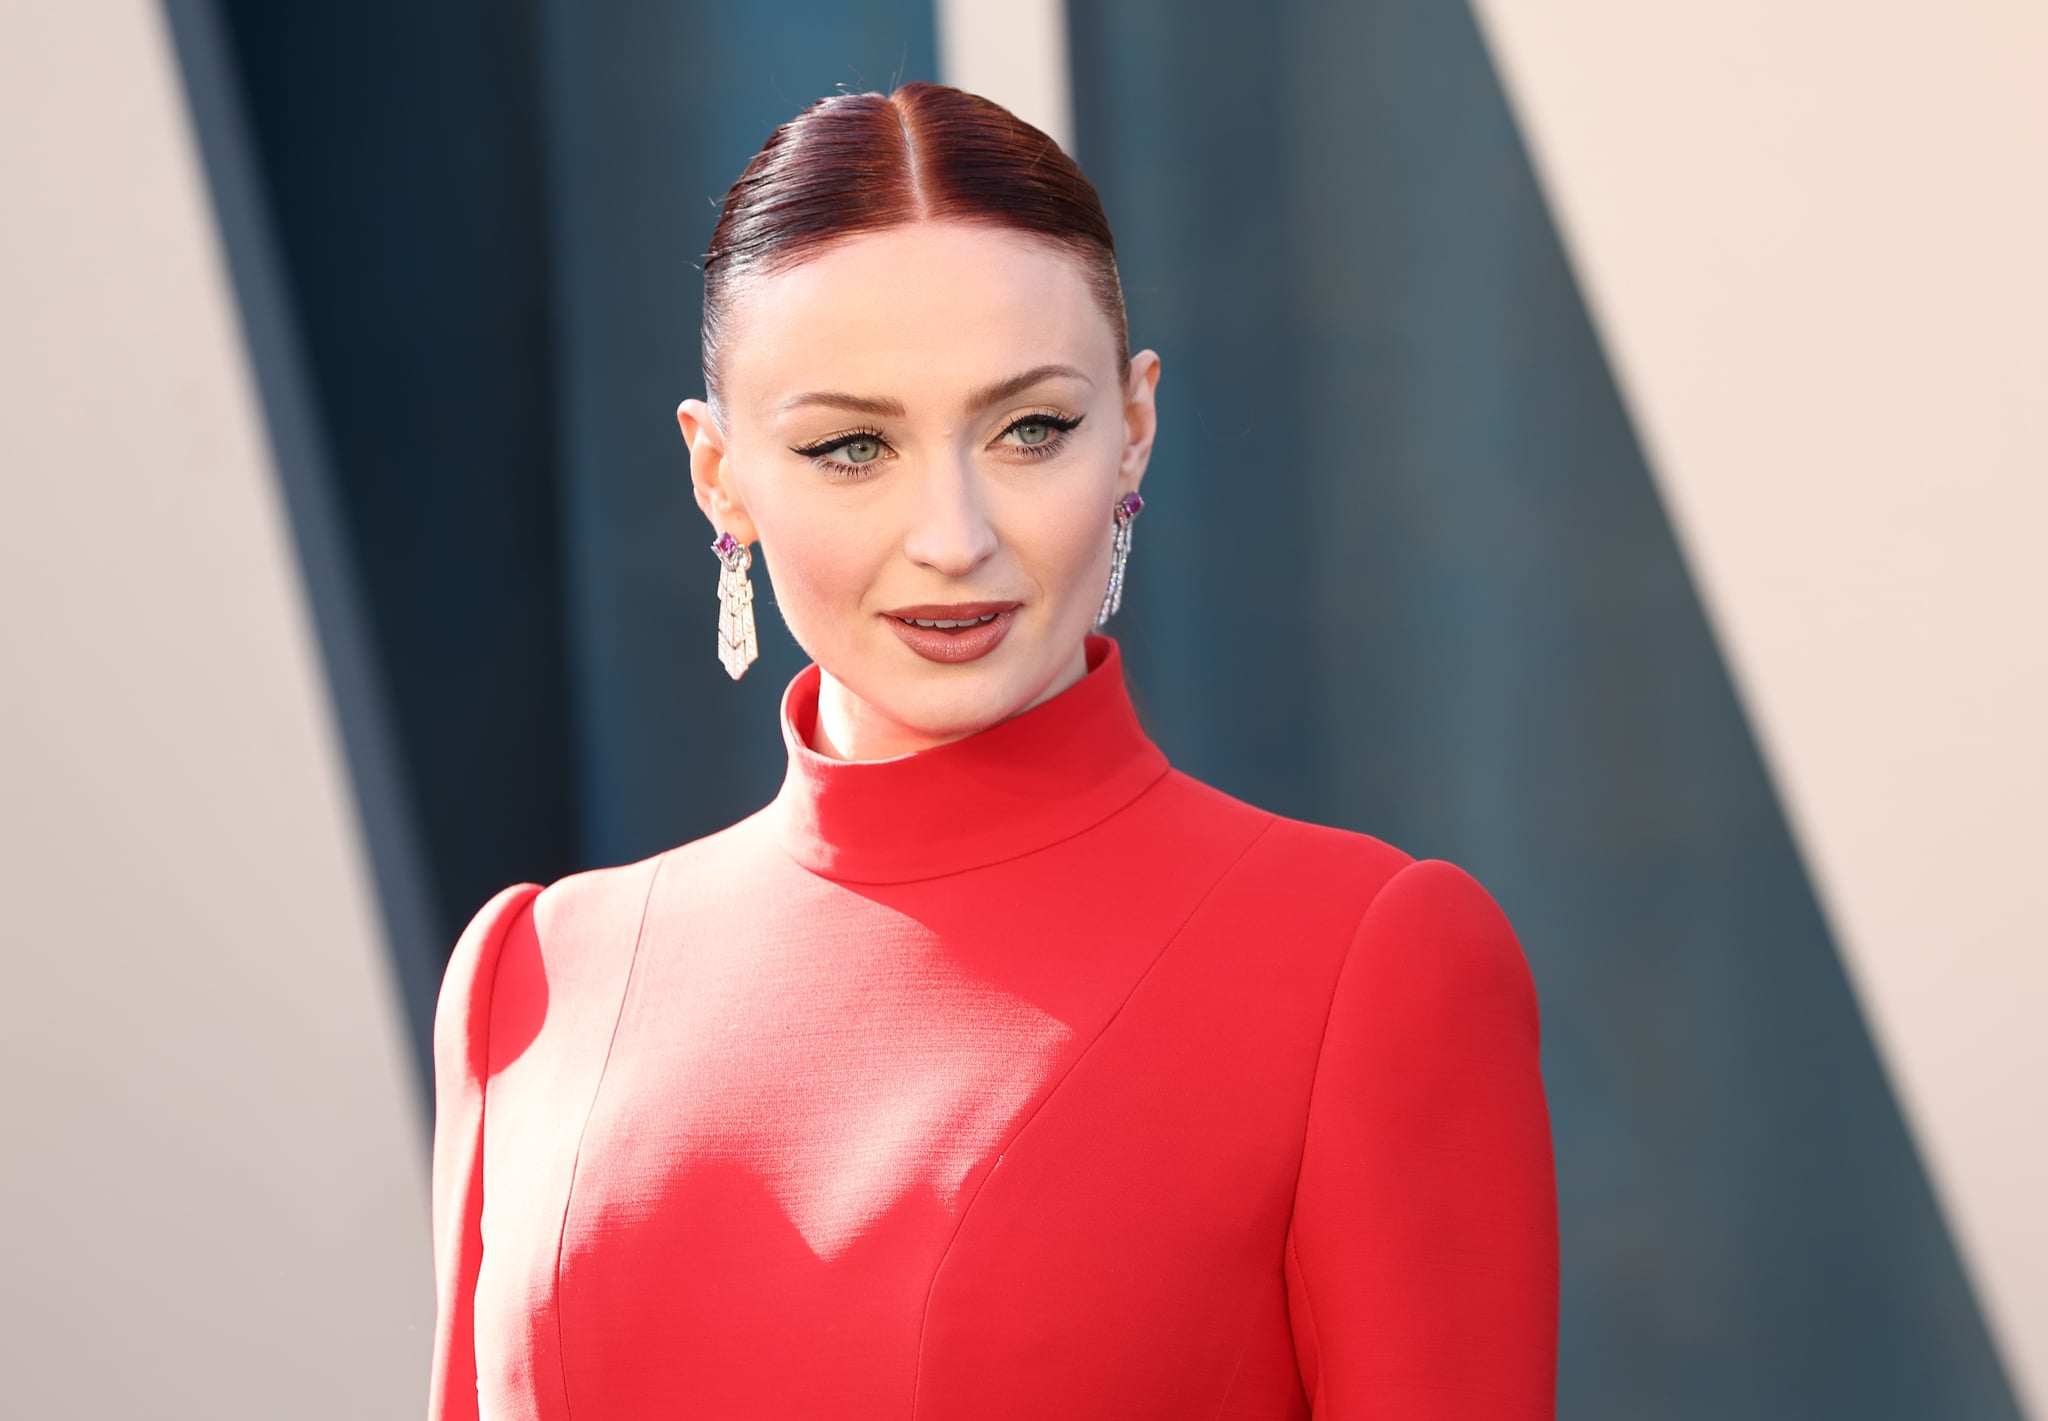  Sophie Turner attends the 2022 Vanity Fair Oscar Party hosted by Radhika Jones at Wallis Annenberg Center for the Performing Arts on March 27, 2022 in Beverly Hills, California. (Photo by Arturo Holmes/FilmMagic)